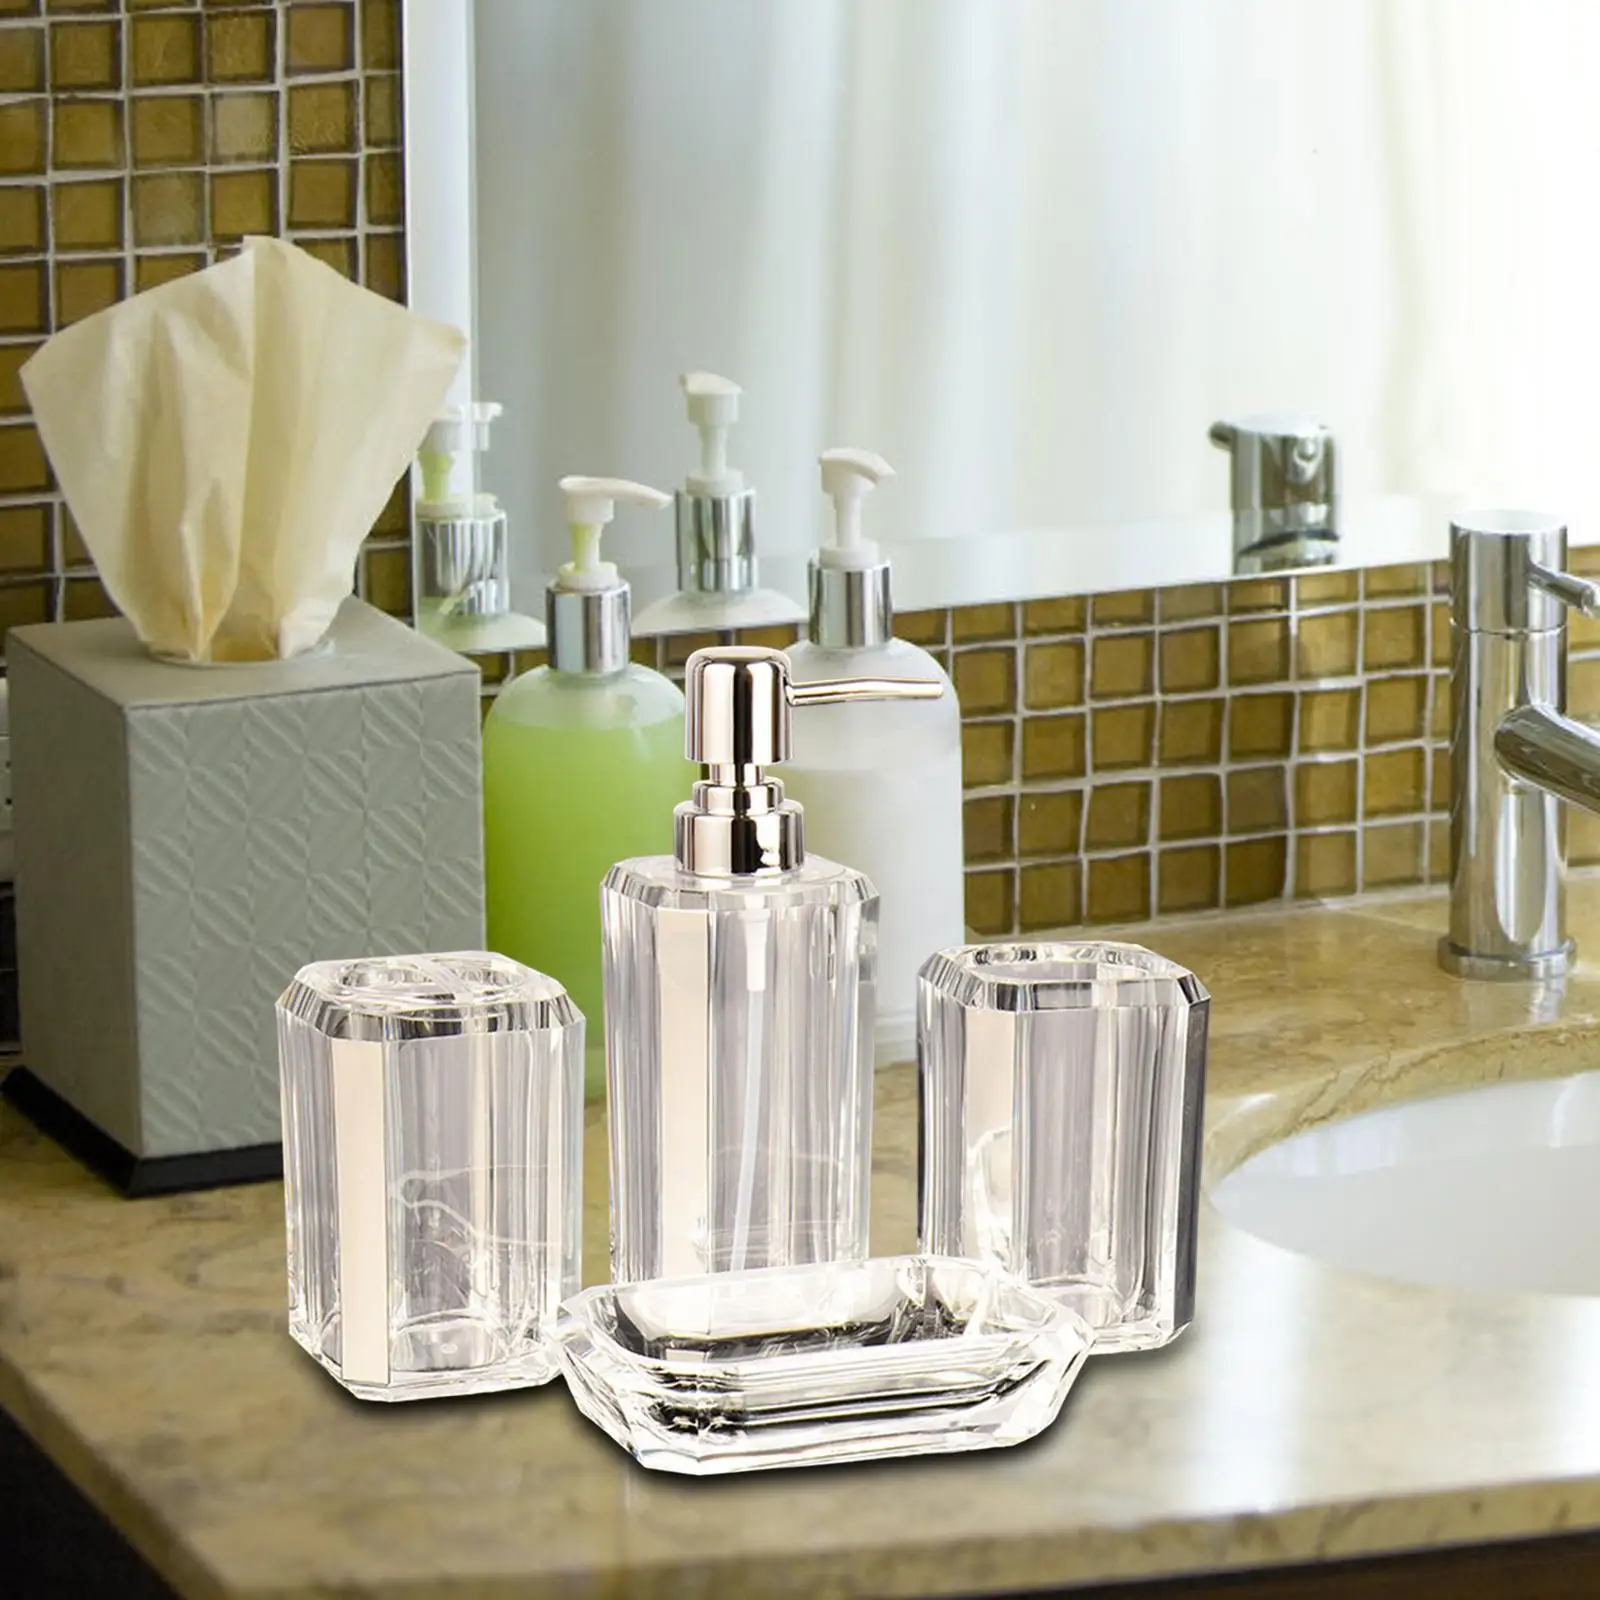 4x Bathroom Accessories Clear Lotion Bottle Toilet Accessories Set Toothbrush Cup Soap Dispenser for Household Hotel Decor